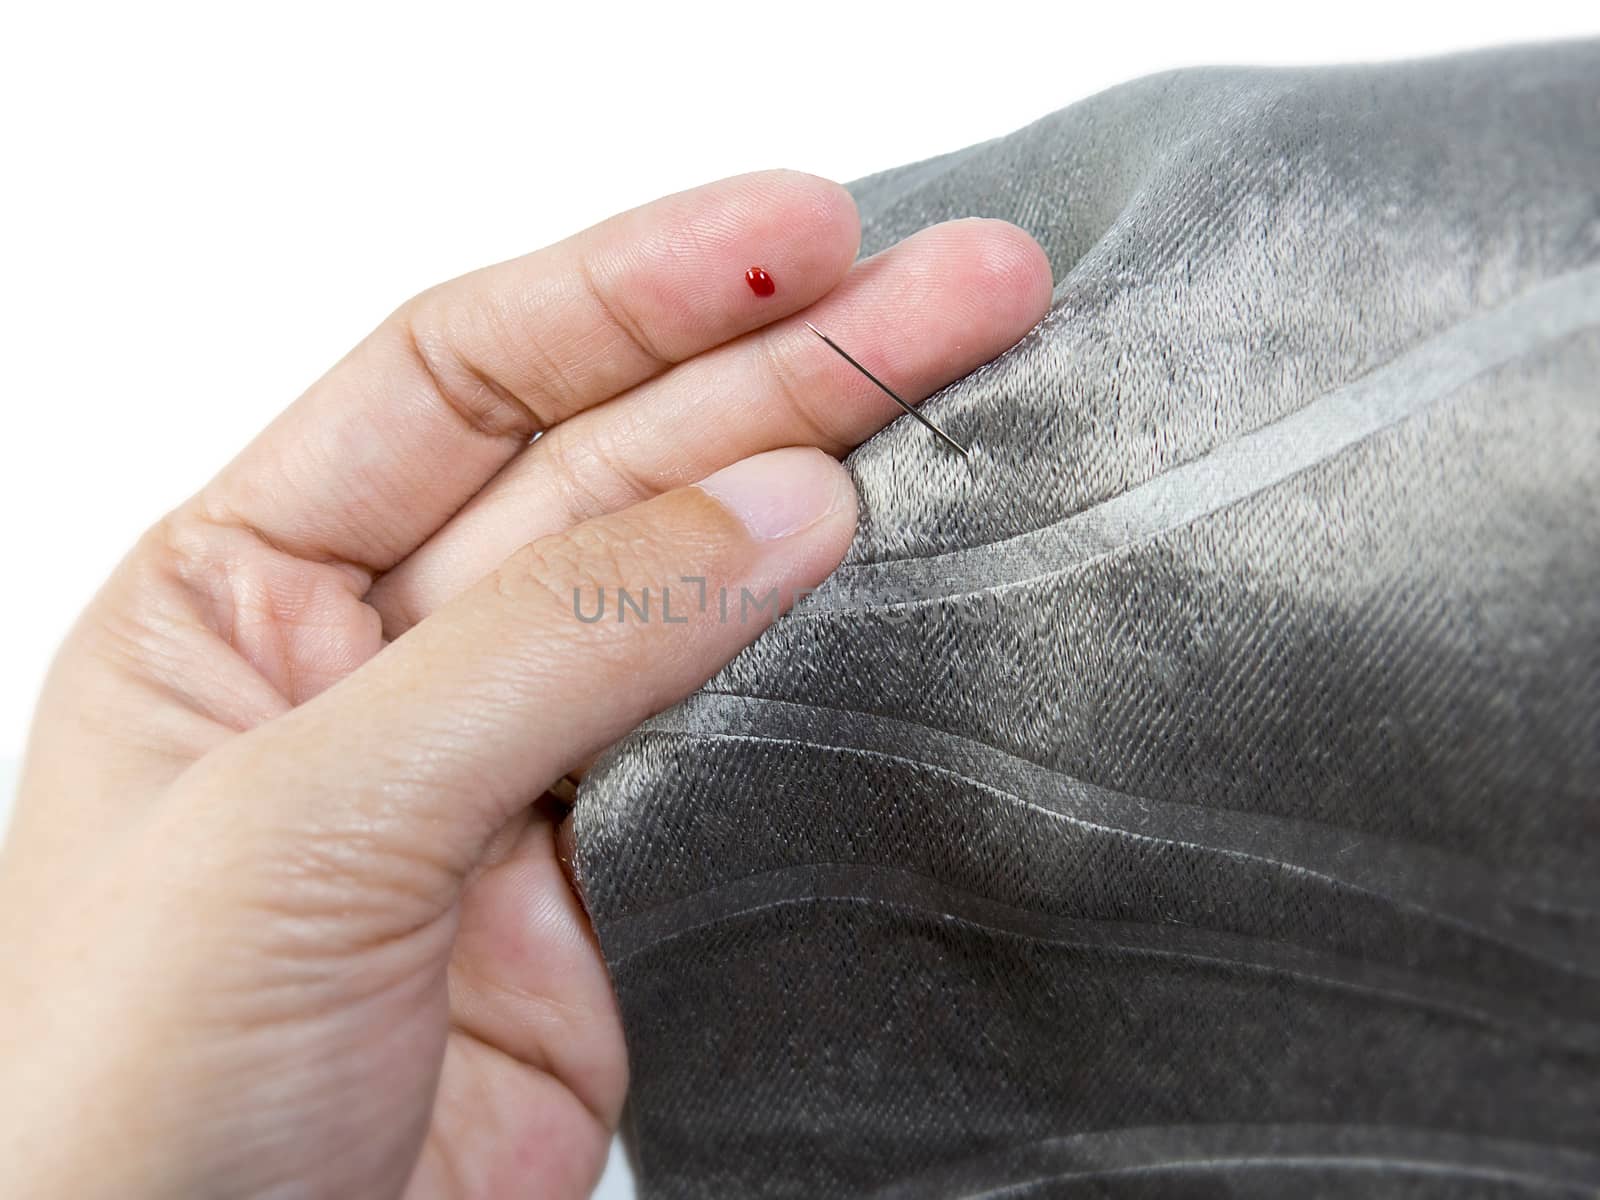 blood at finger accident by needle from sewing by asiandelight